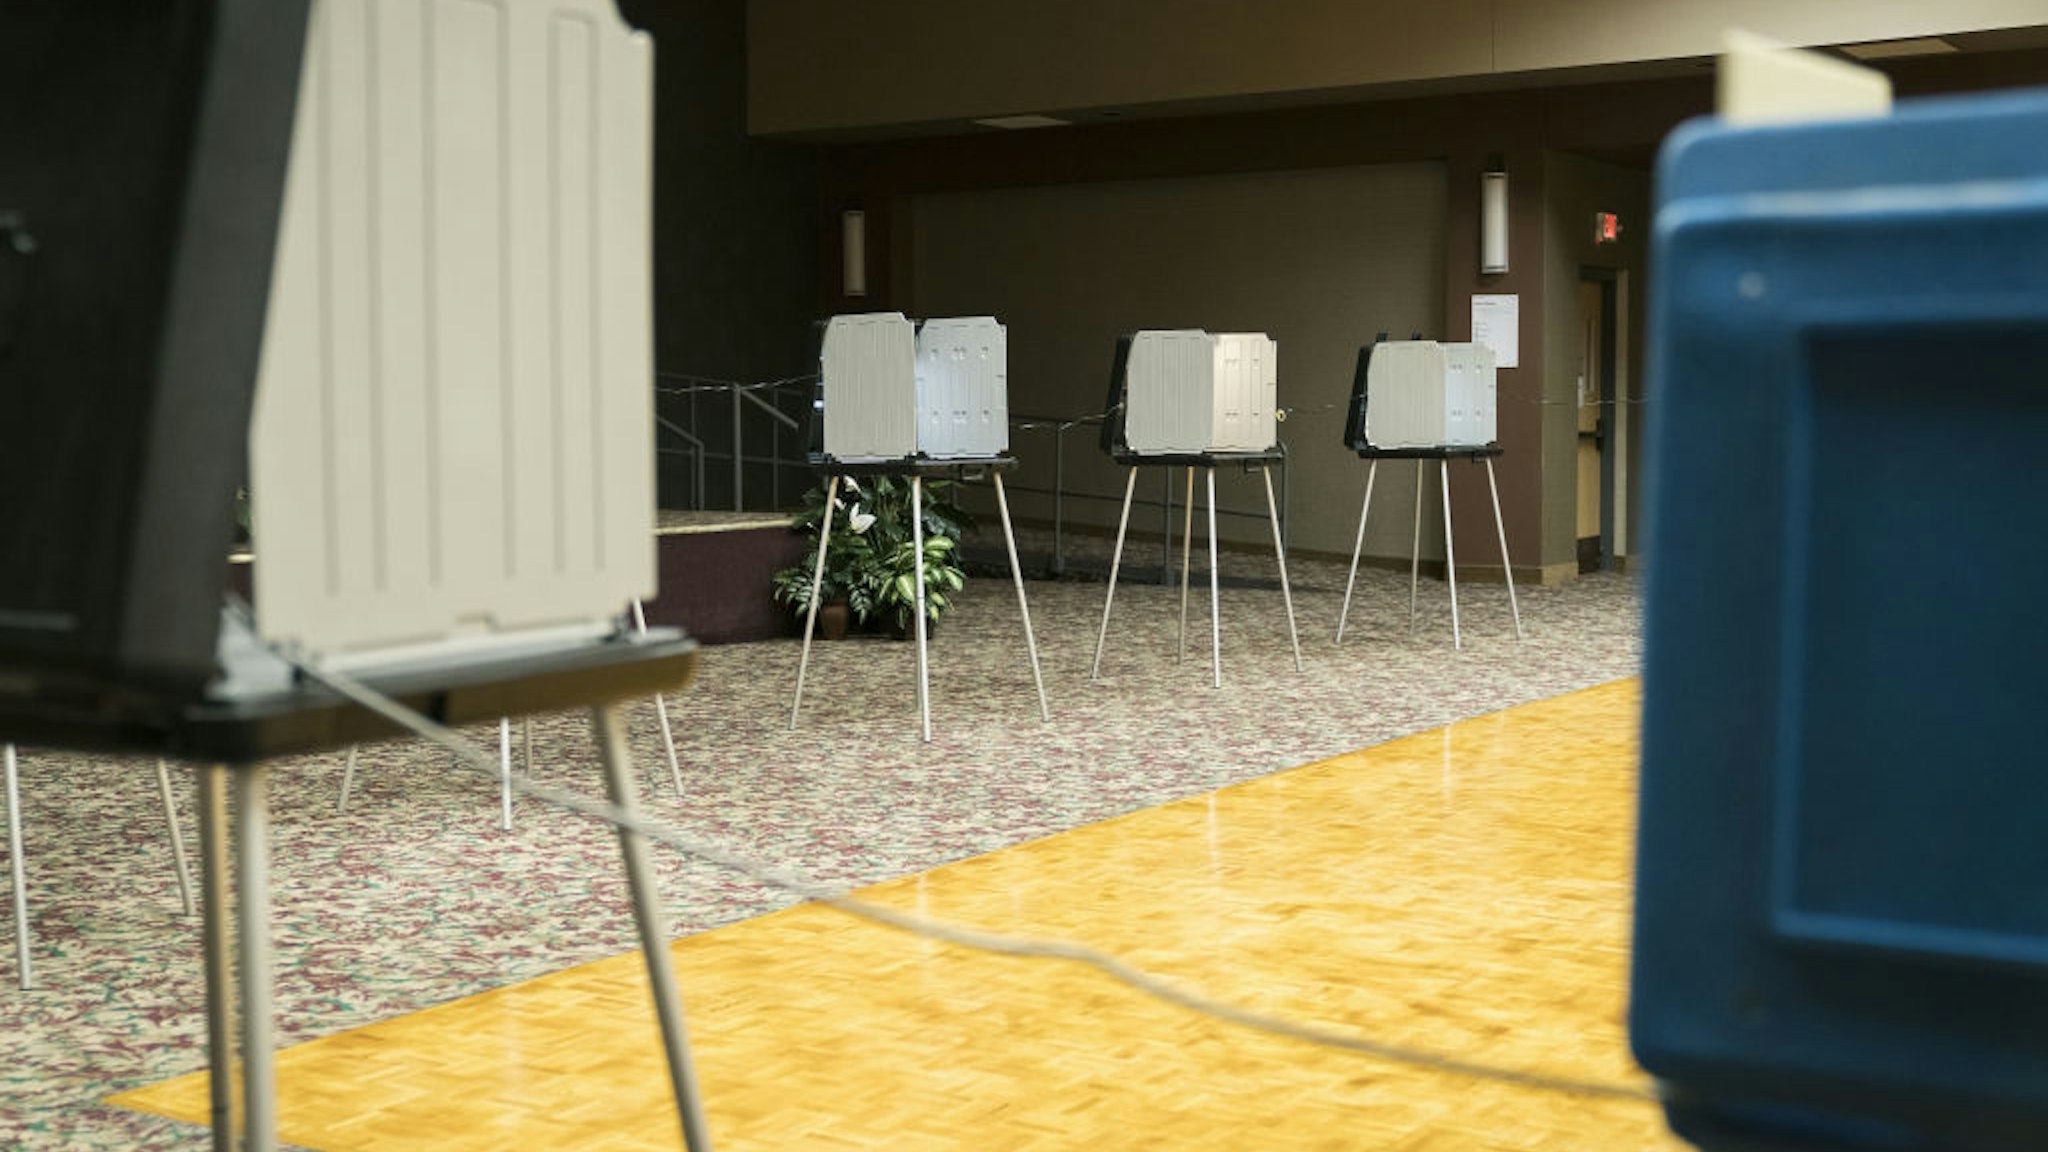 Voting booths sit empty at a polling location in Minneapolis, Minnesota, U.S., on Tuesday, Aug. 11, 2020.